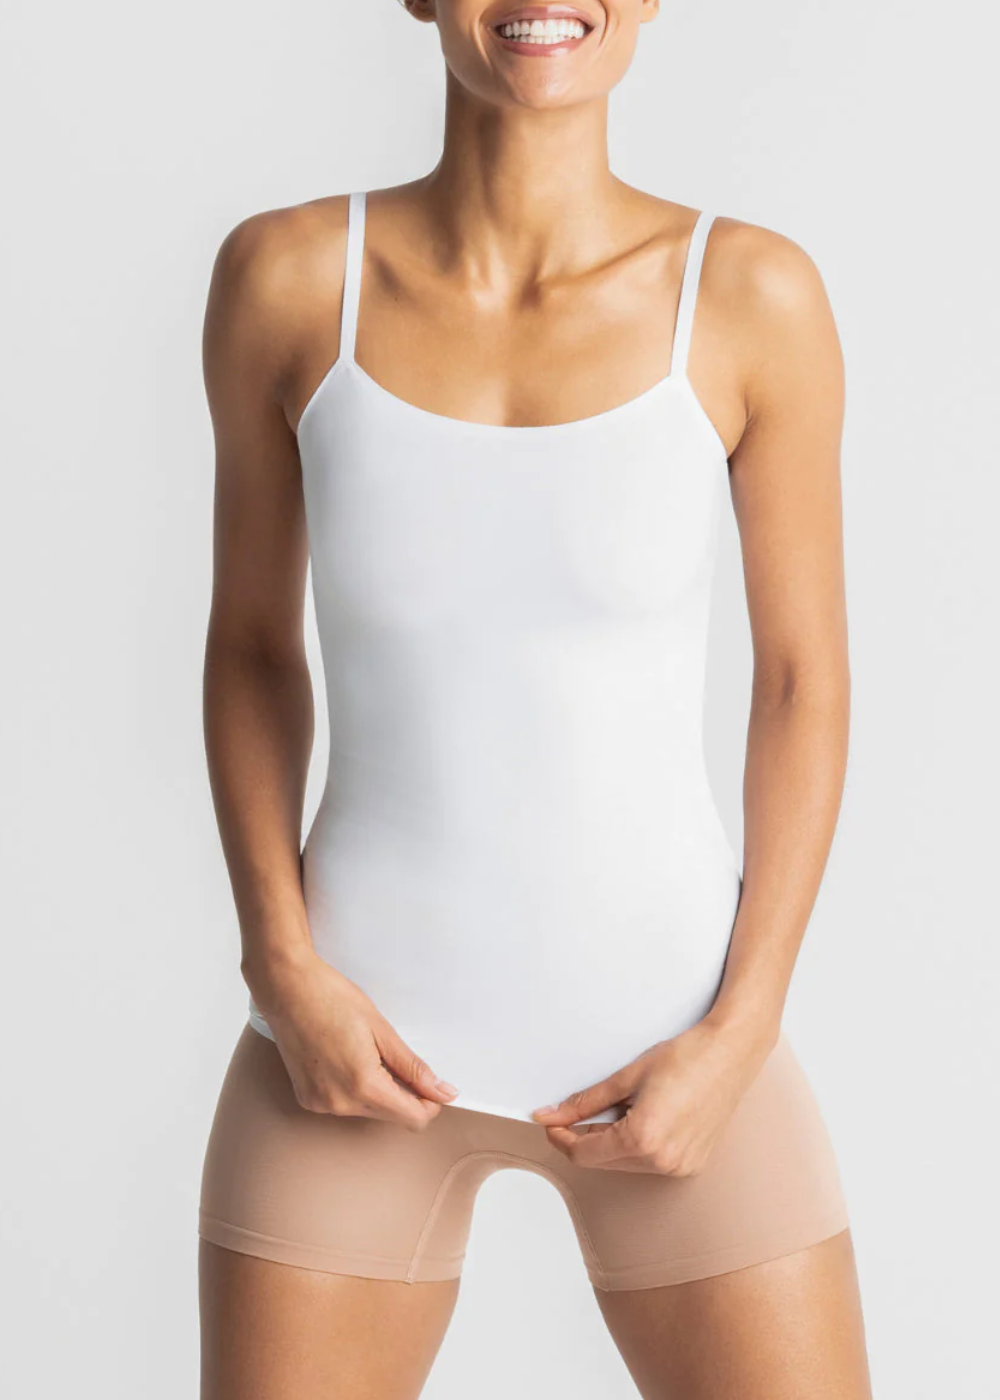 3-in-1 Shaping Camisole from Yummie in White  - 1